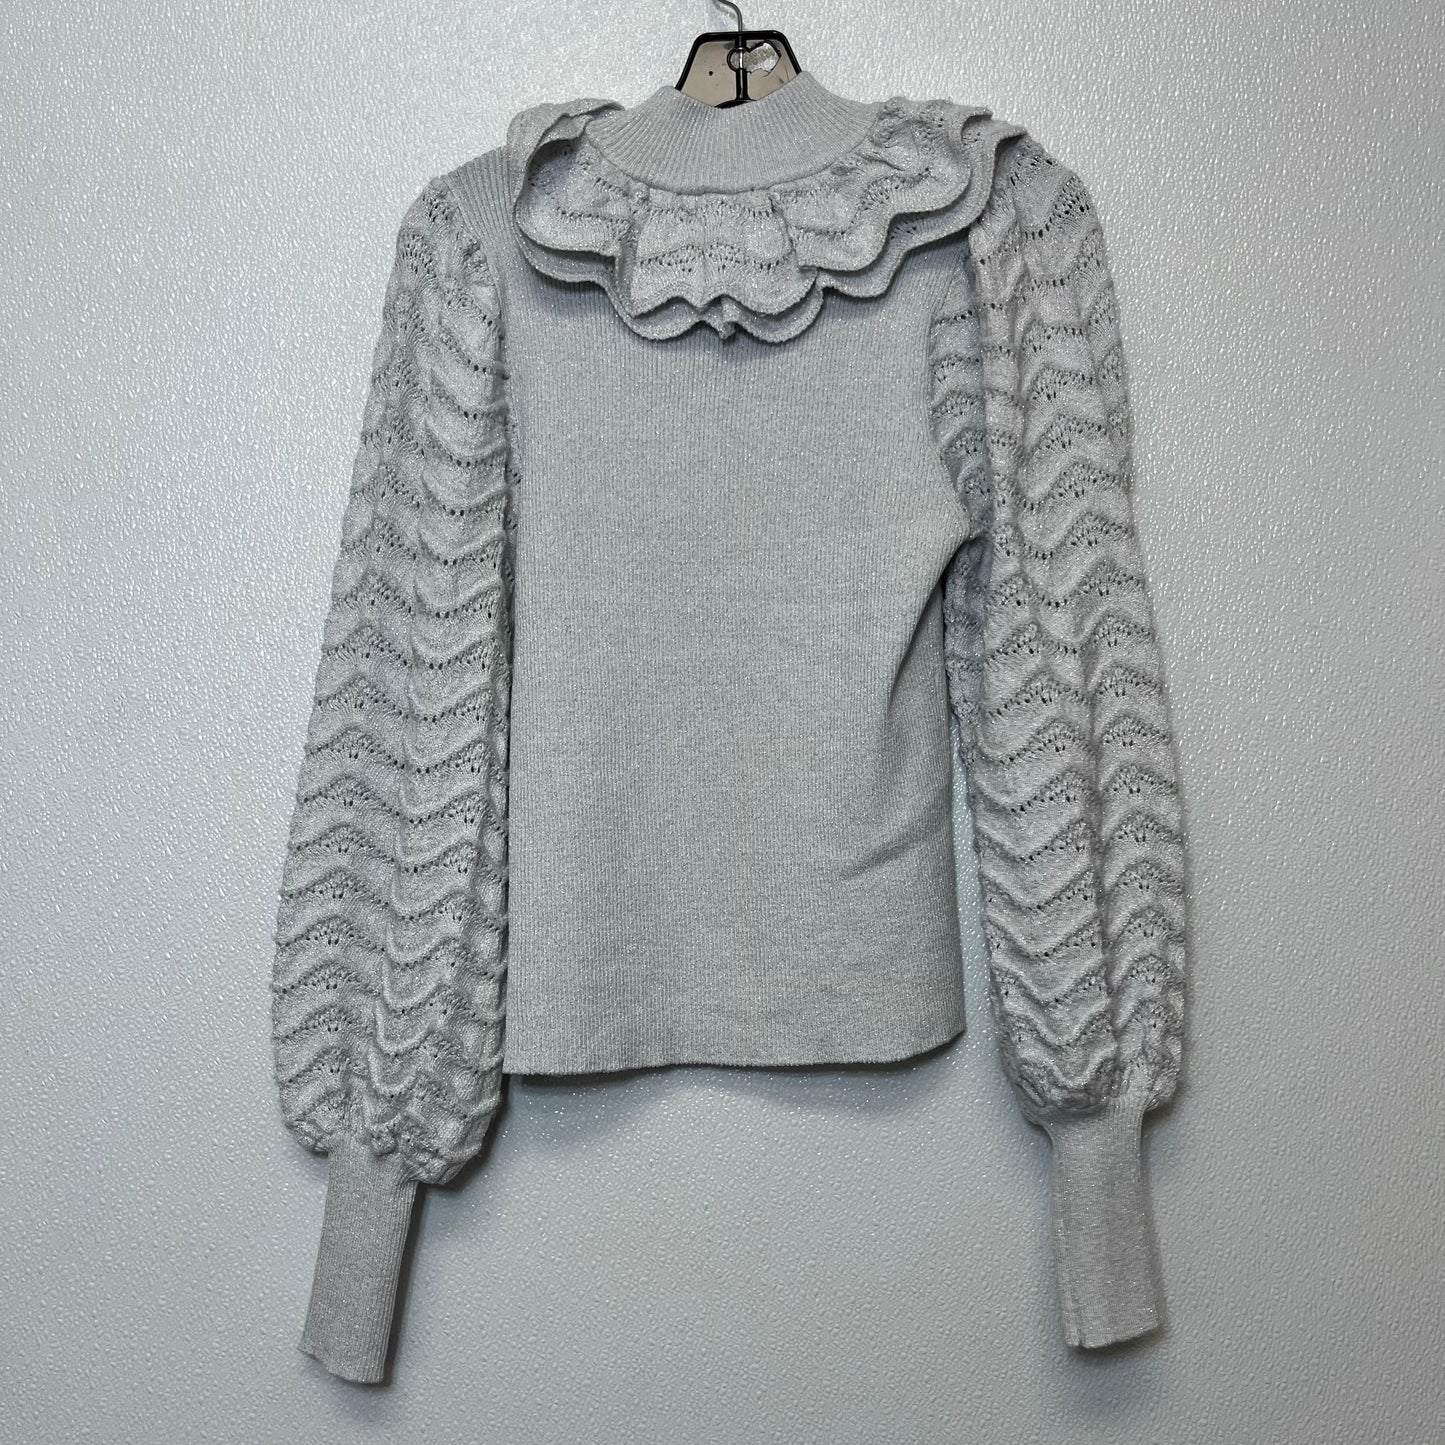 Sweater By Inc O  Size: M